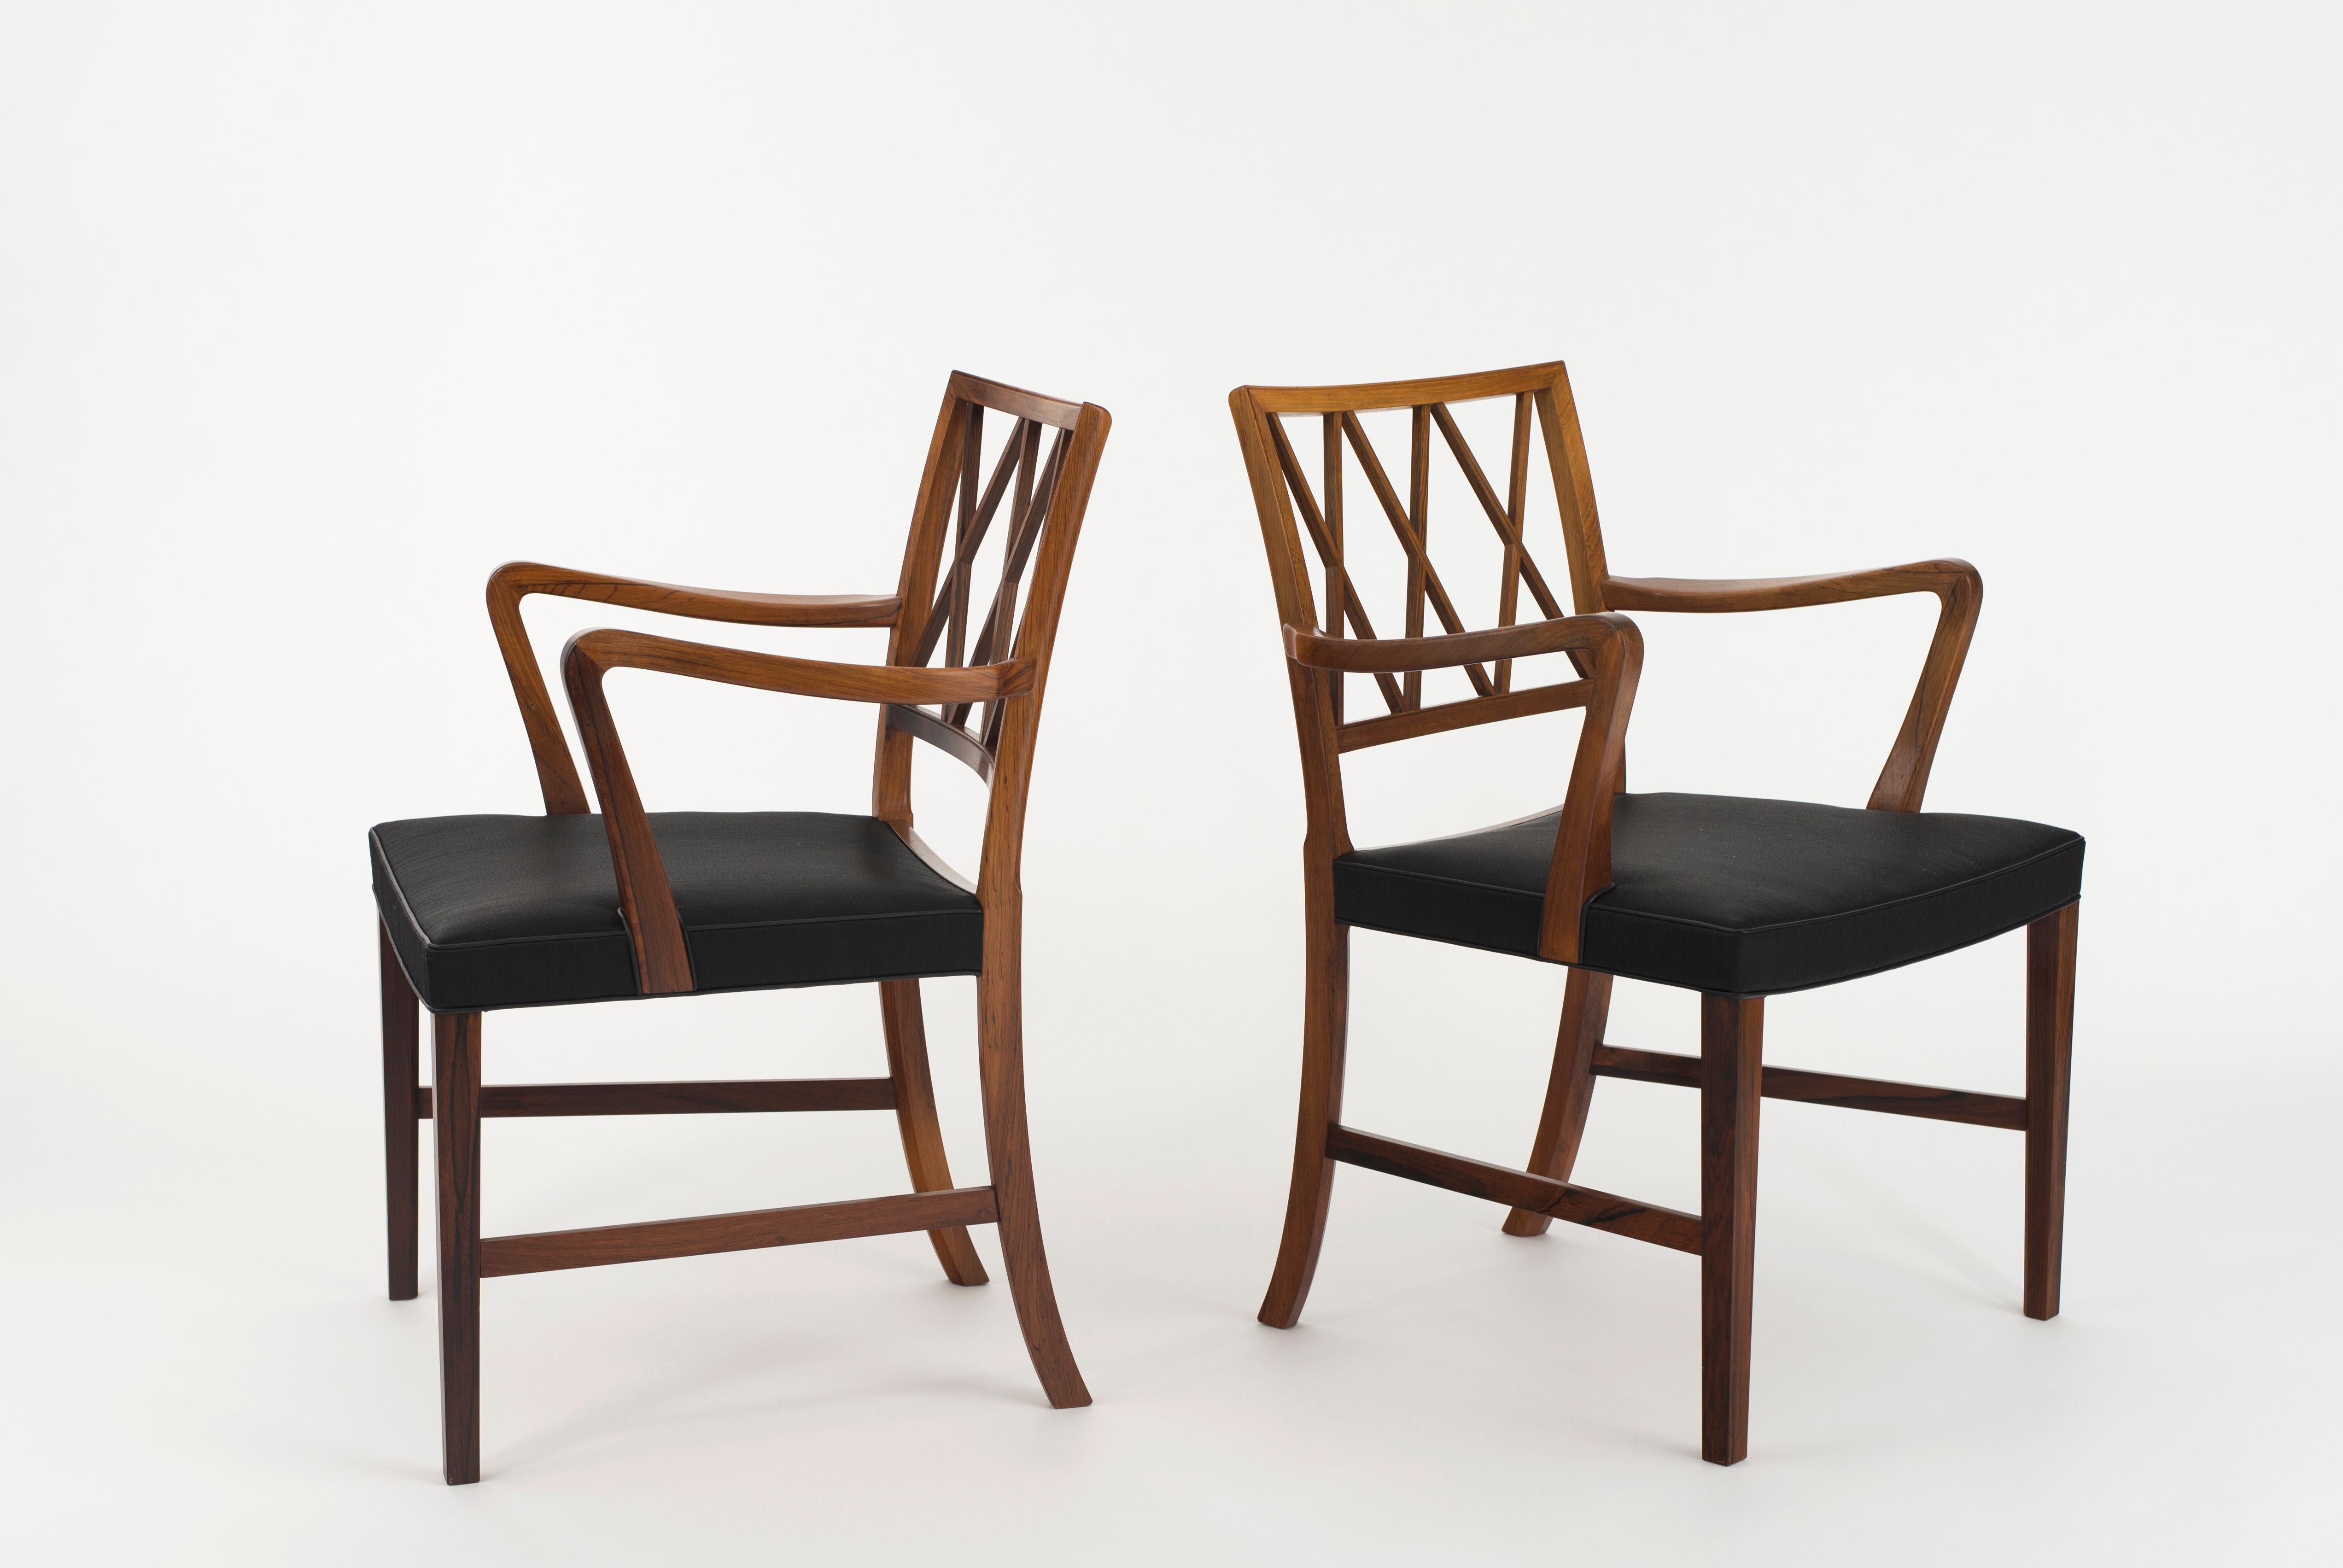 Ole Wanscher pair of armchairs in Rosewood and black horsehair. Executed by A. J. Iversen, Copenhagen, Denmark.